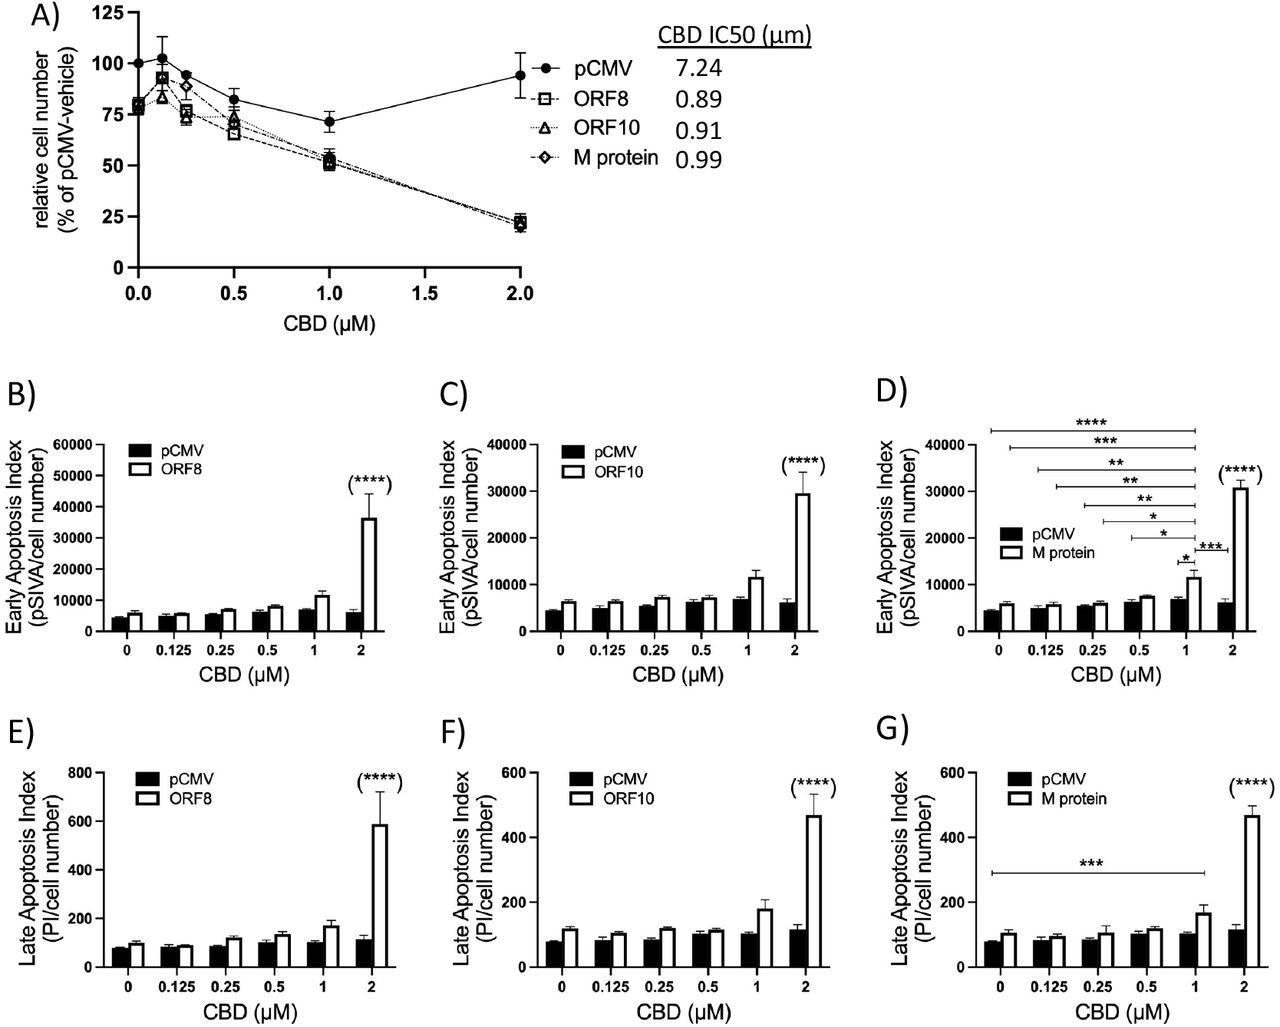 Effect of ORF8, ORF10, or M protein expression, with and without CBD treatment, on HEK293 cell number and apoptosis indexes. (A) Dose-dependent effects of CBD on the relative number of cells per well 24 h after transfection with control plasmid (pCMV), or plasmids expressing ORF8, ORF10, or M protein (n=3-12). IC50 values for CBD concentration in combination with each group are shown. (B-D) Dose-response effect to CBD on the early apoptosis index in HEK293 cells expressing pCMV or viral genes at 24 h. (E-G) Dose-response effect to CBD on the late apoptosis index in HEK293 cells transfected with control or viral plasmids. Apoptotic indexes were calculated by dividing the relative absorption of the respective marker by the number of cells per well. Apoptosis data were analyzed by 2-way ANOVA with Tukey’s post-hoc test,